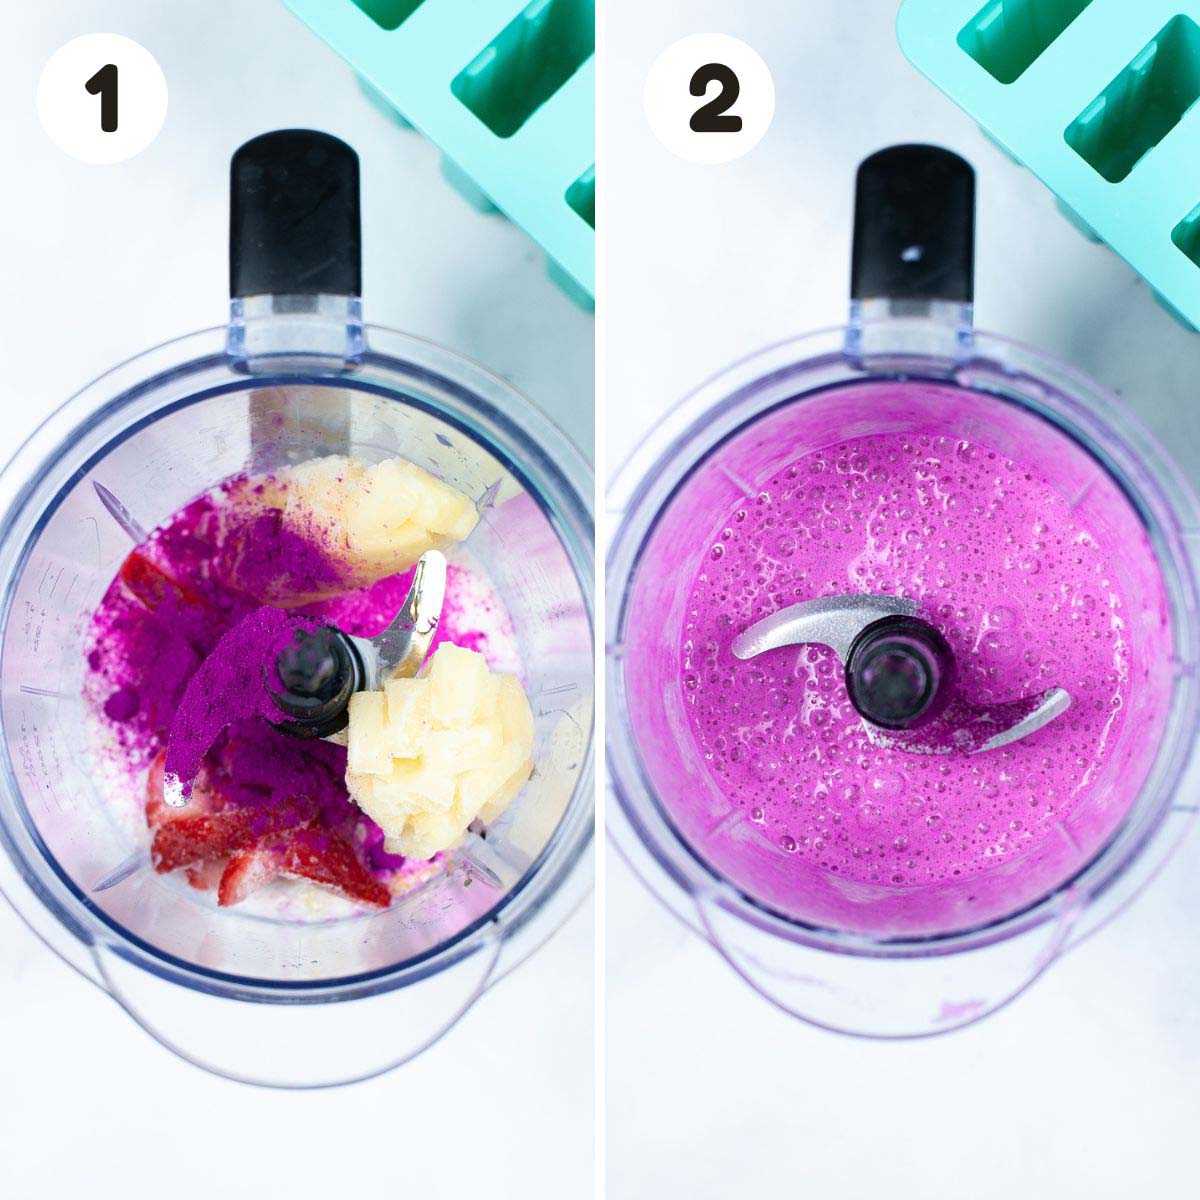 two image process making dragon fruit popsicles.